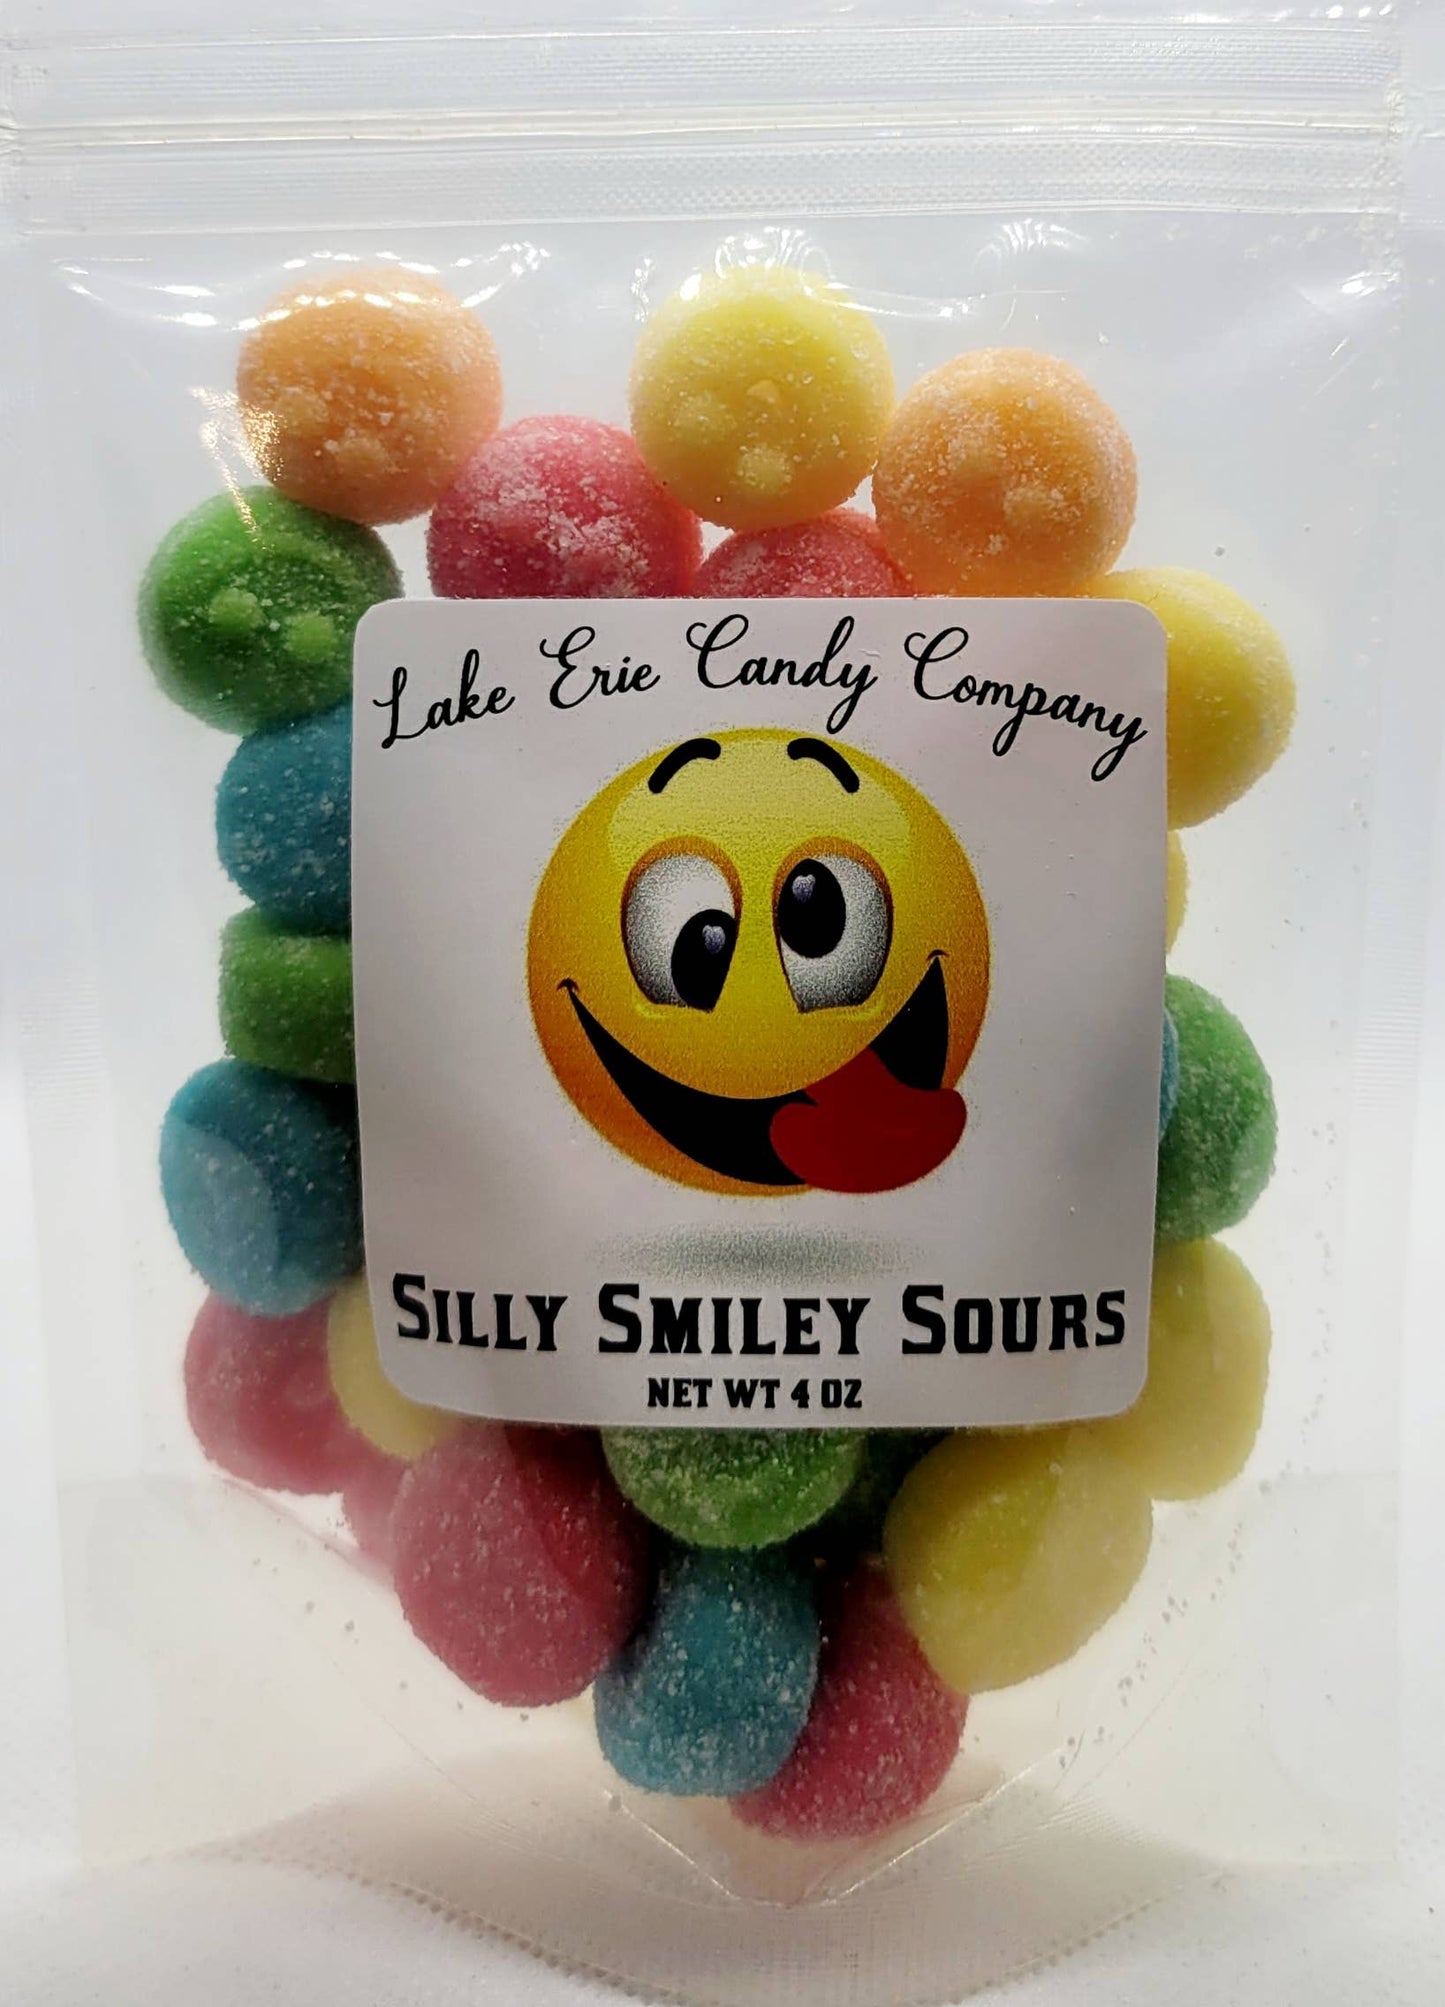 Silly Smiley Sours